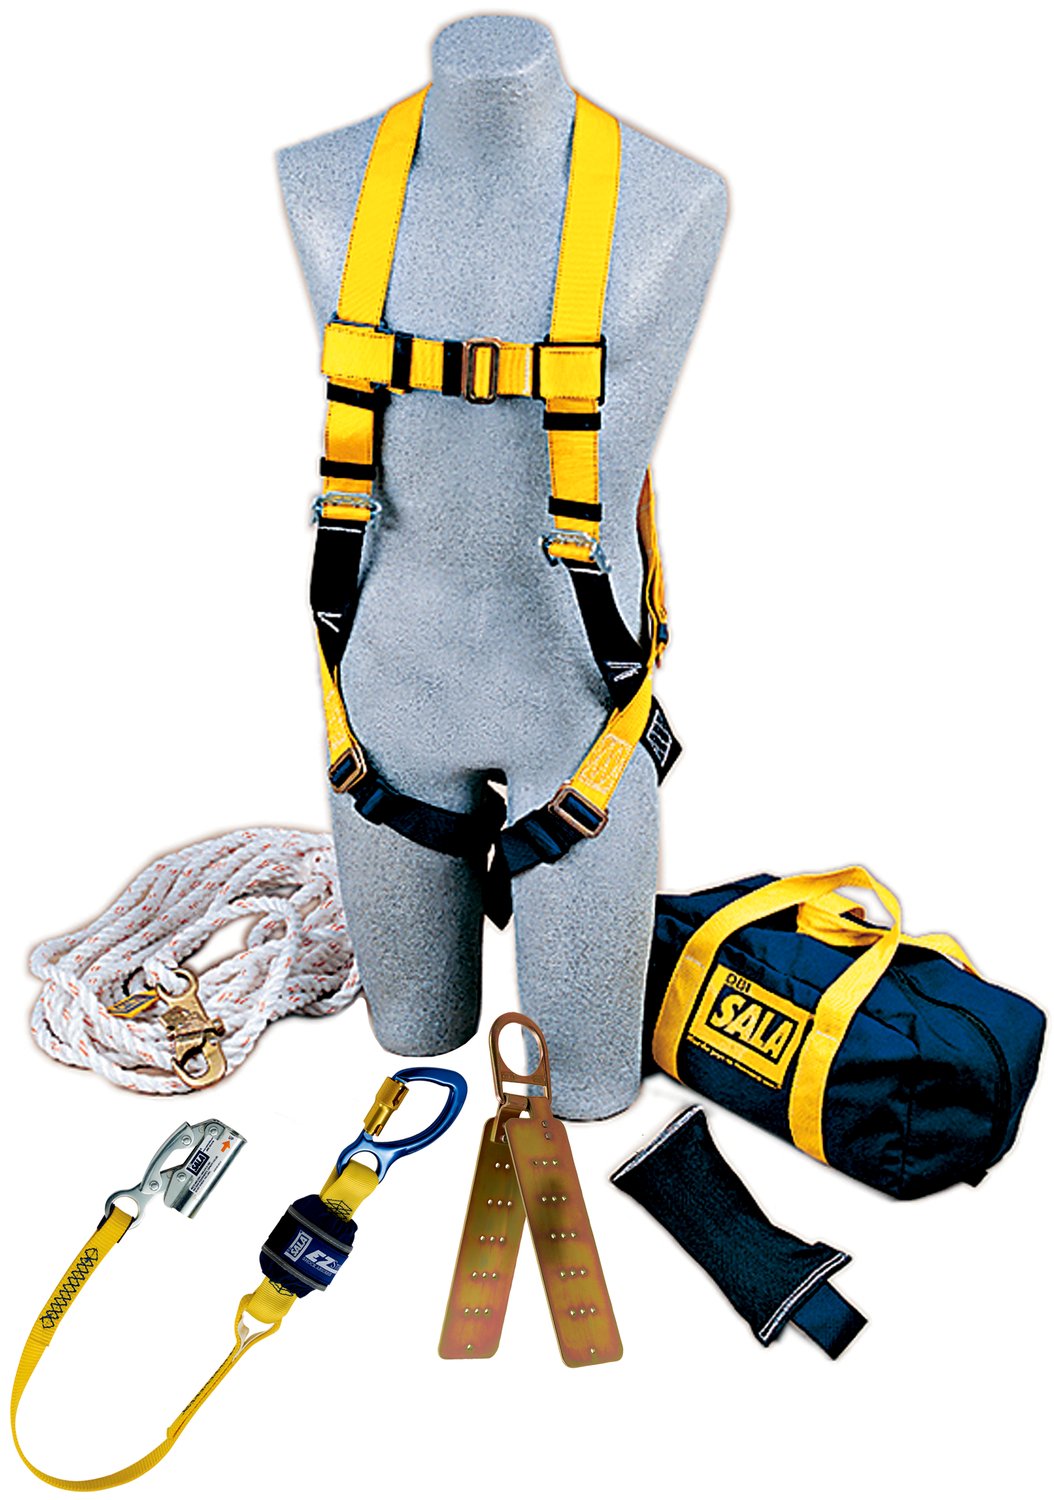 7012818307 - 3M DBI-SALA Roofers Fall Protection Compliance Kit 2104169, Anchor, Harness, Rope Grab/Lanyard, Lifeline, 50 ft